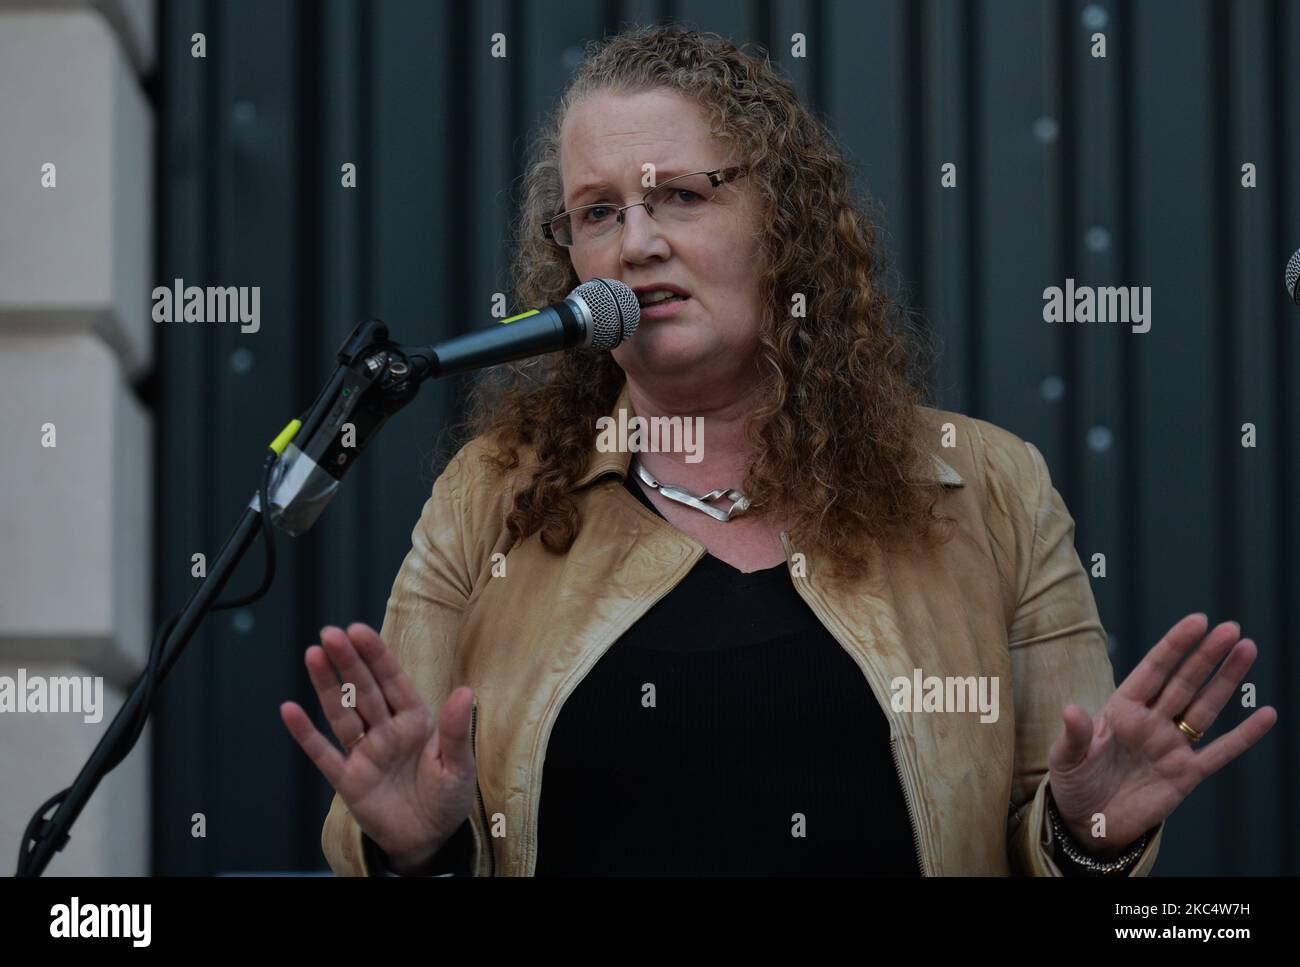 Professor Dolores Cahill, the chairperson of the Irish Freedom Party addresses the crowd during an anti-vaccination and anti-lockdown rally, on day 39 of the nationwide Level 5 lockdown. On Saturday, November 28, 2020, in Dublin, Ireland. (Photo by Artur Widak/NurPhoto) Stock Photo